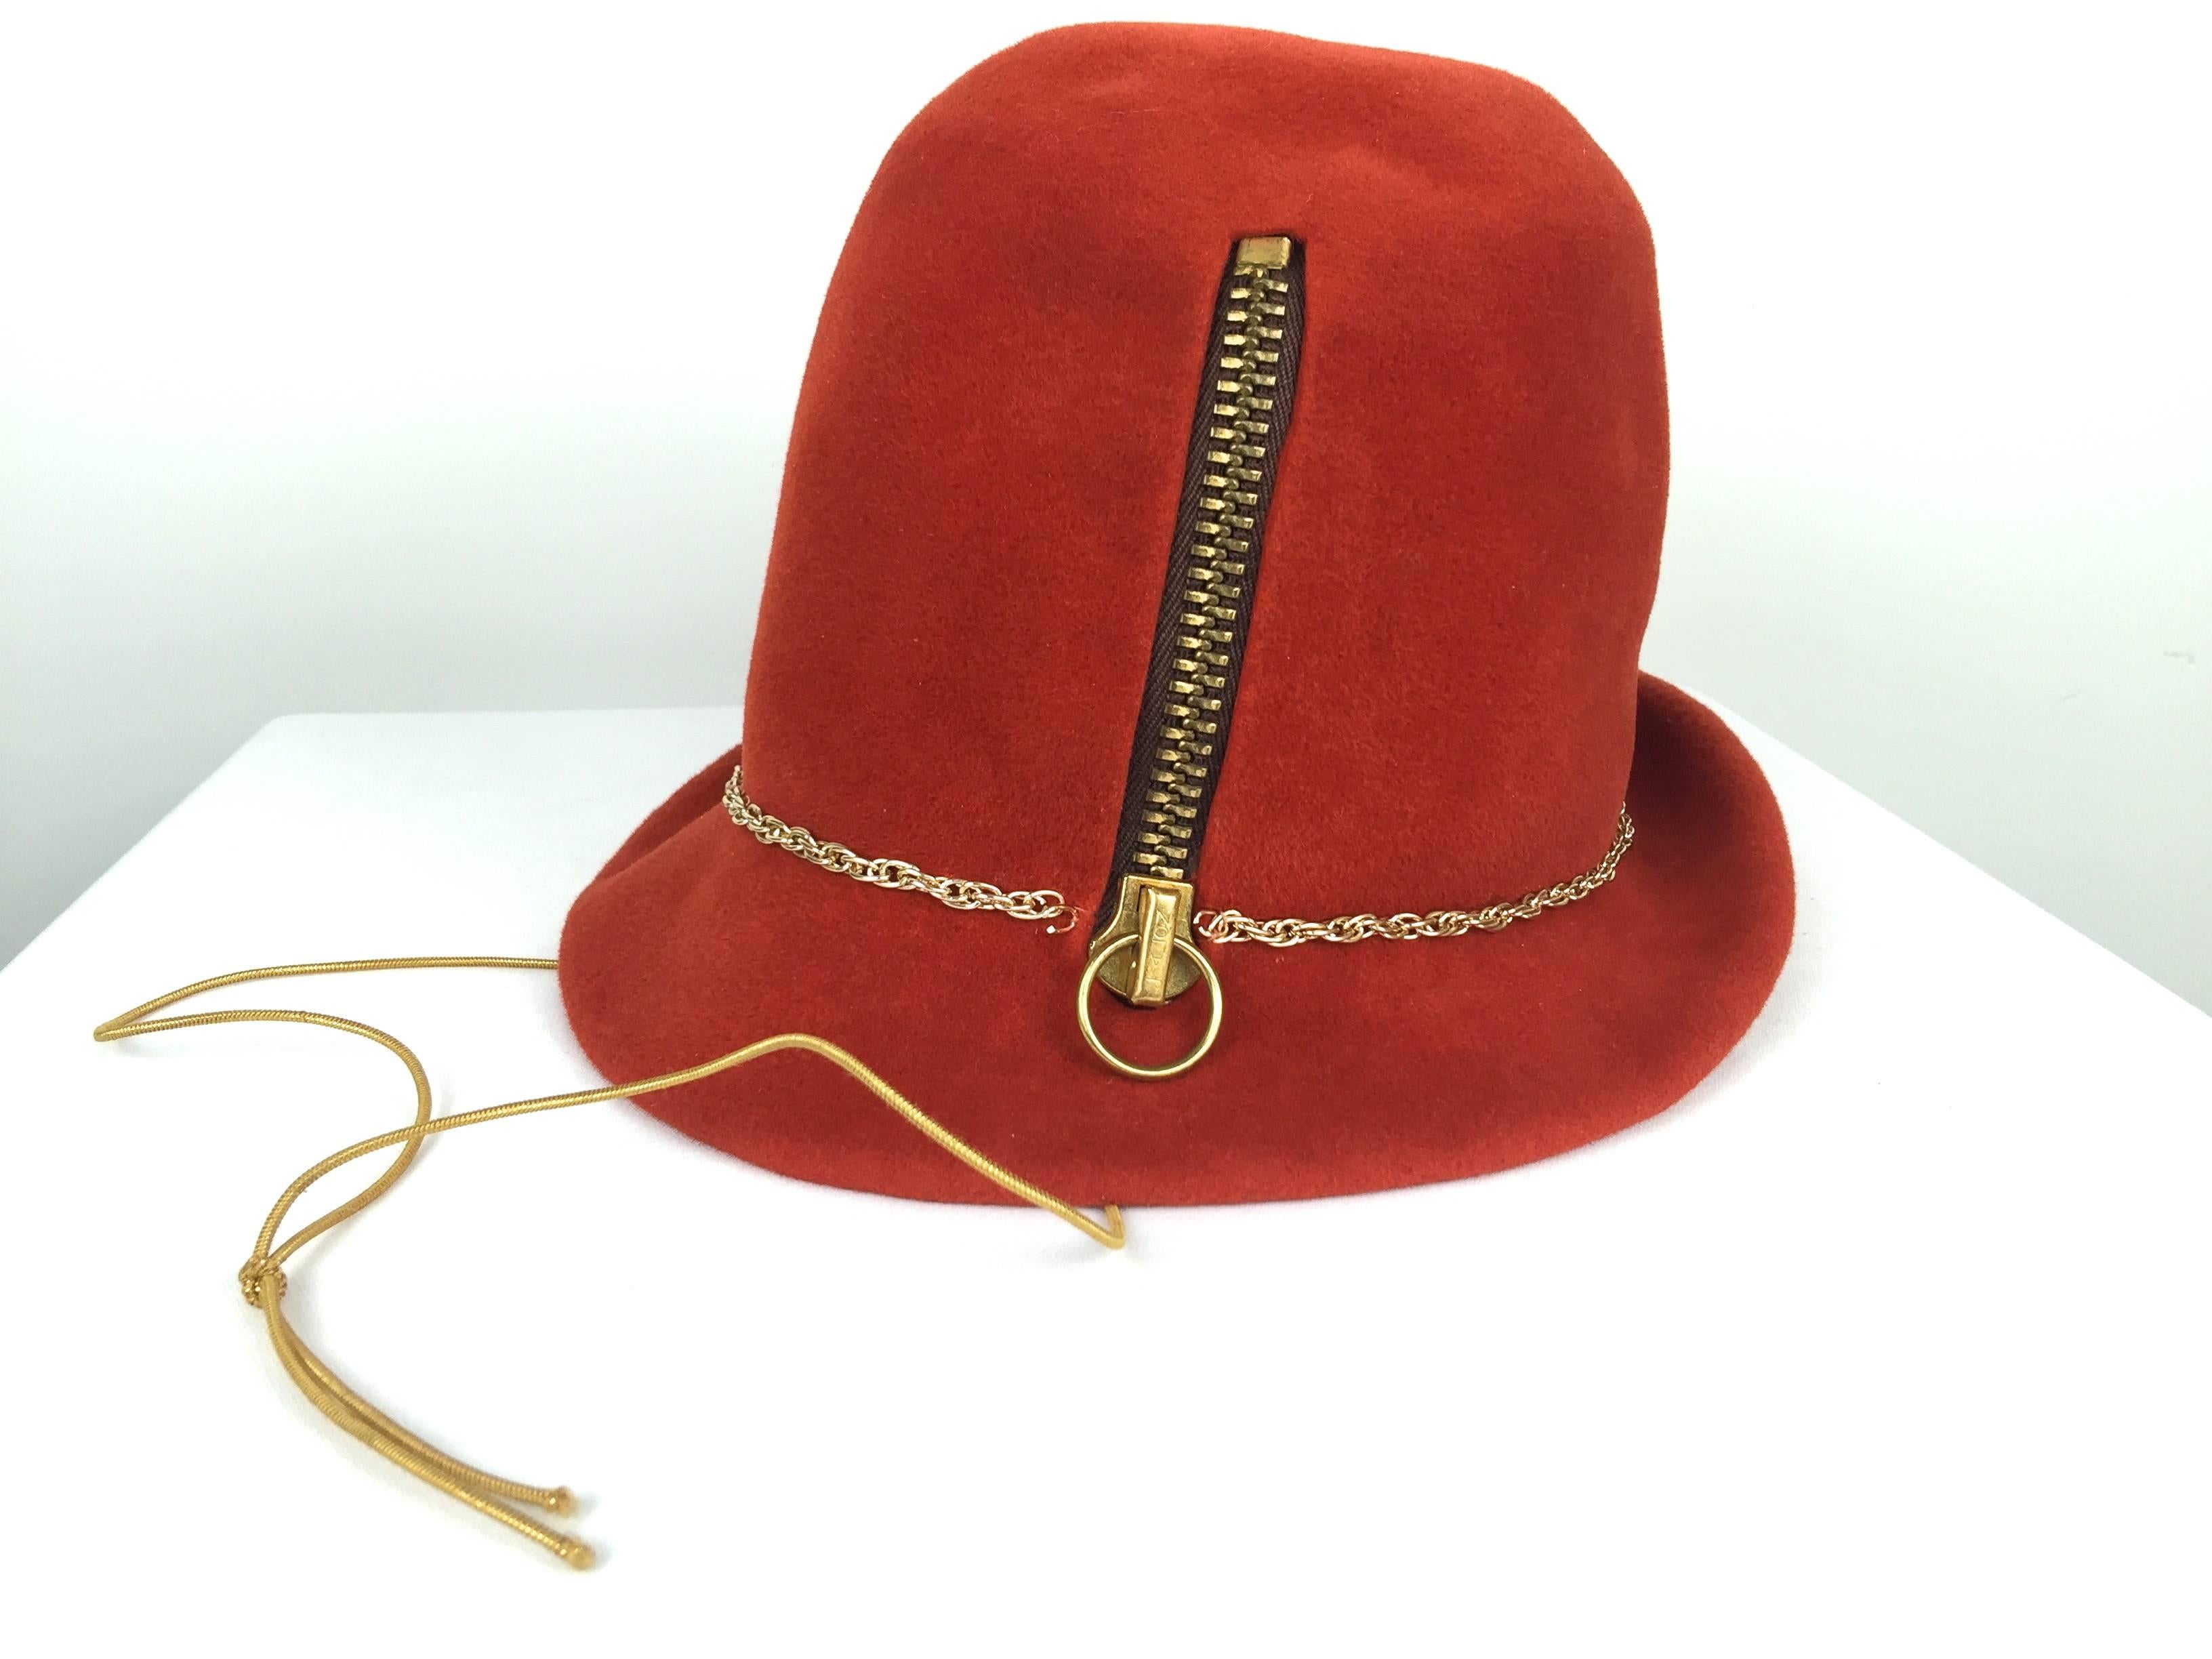 
Yves Saint Laurent 1960's Mod zipper fedora hat. Museum quality.

Haute Couture.

I just feel so lucky when I find a 1960's piece like this by a legendary
French designer.  

It is so fascinating to see how they rebelled against the mighty